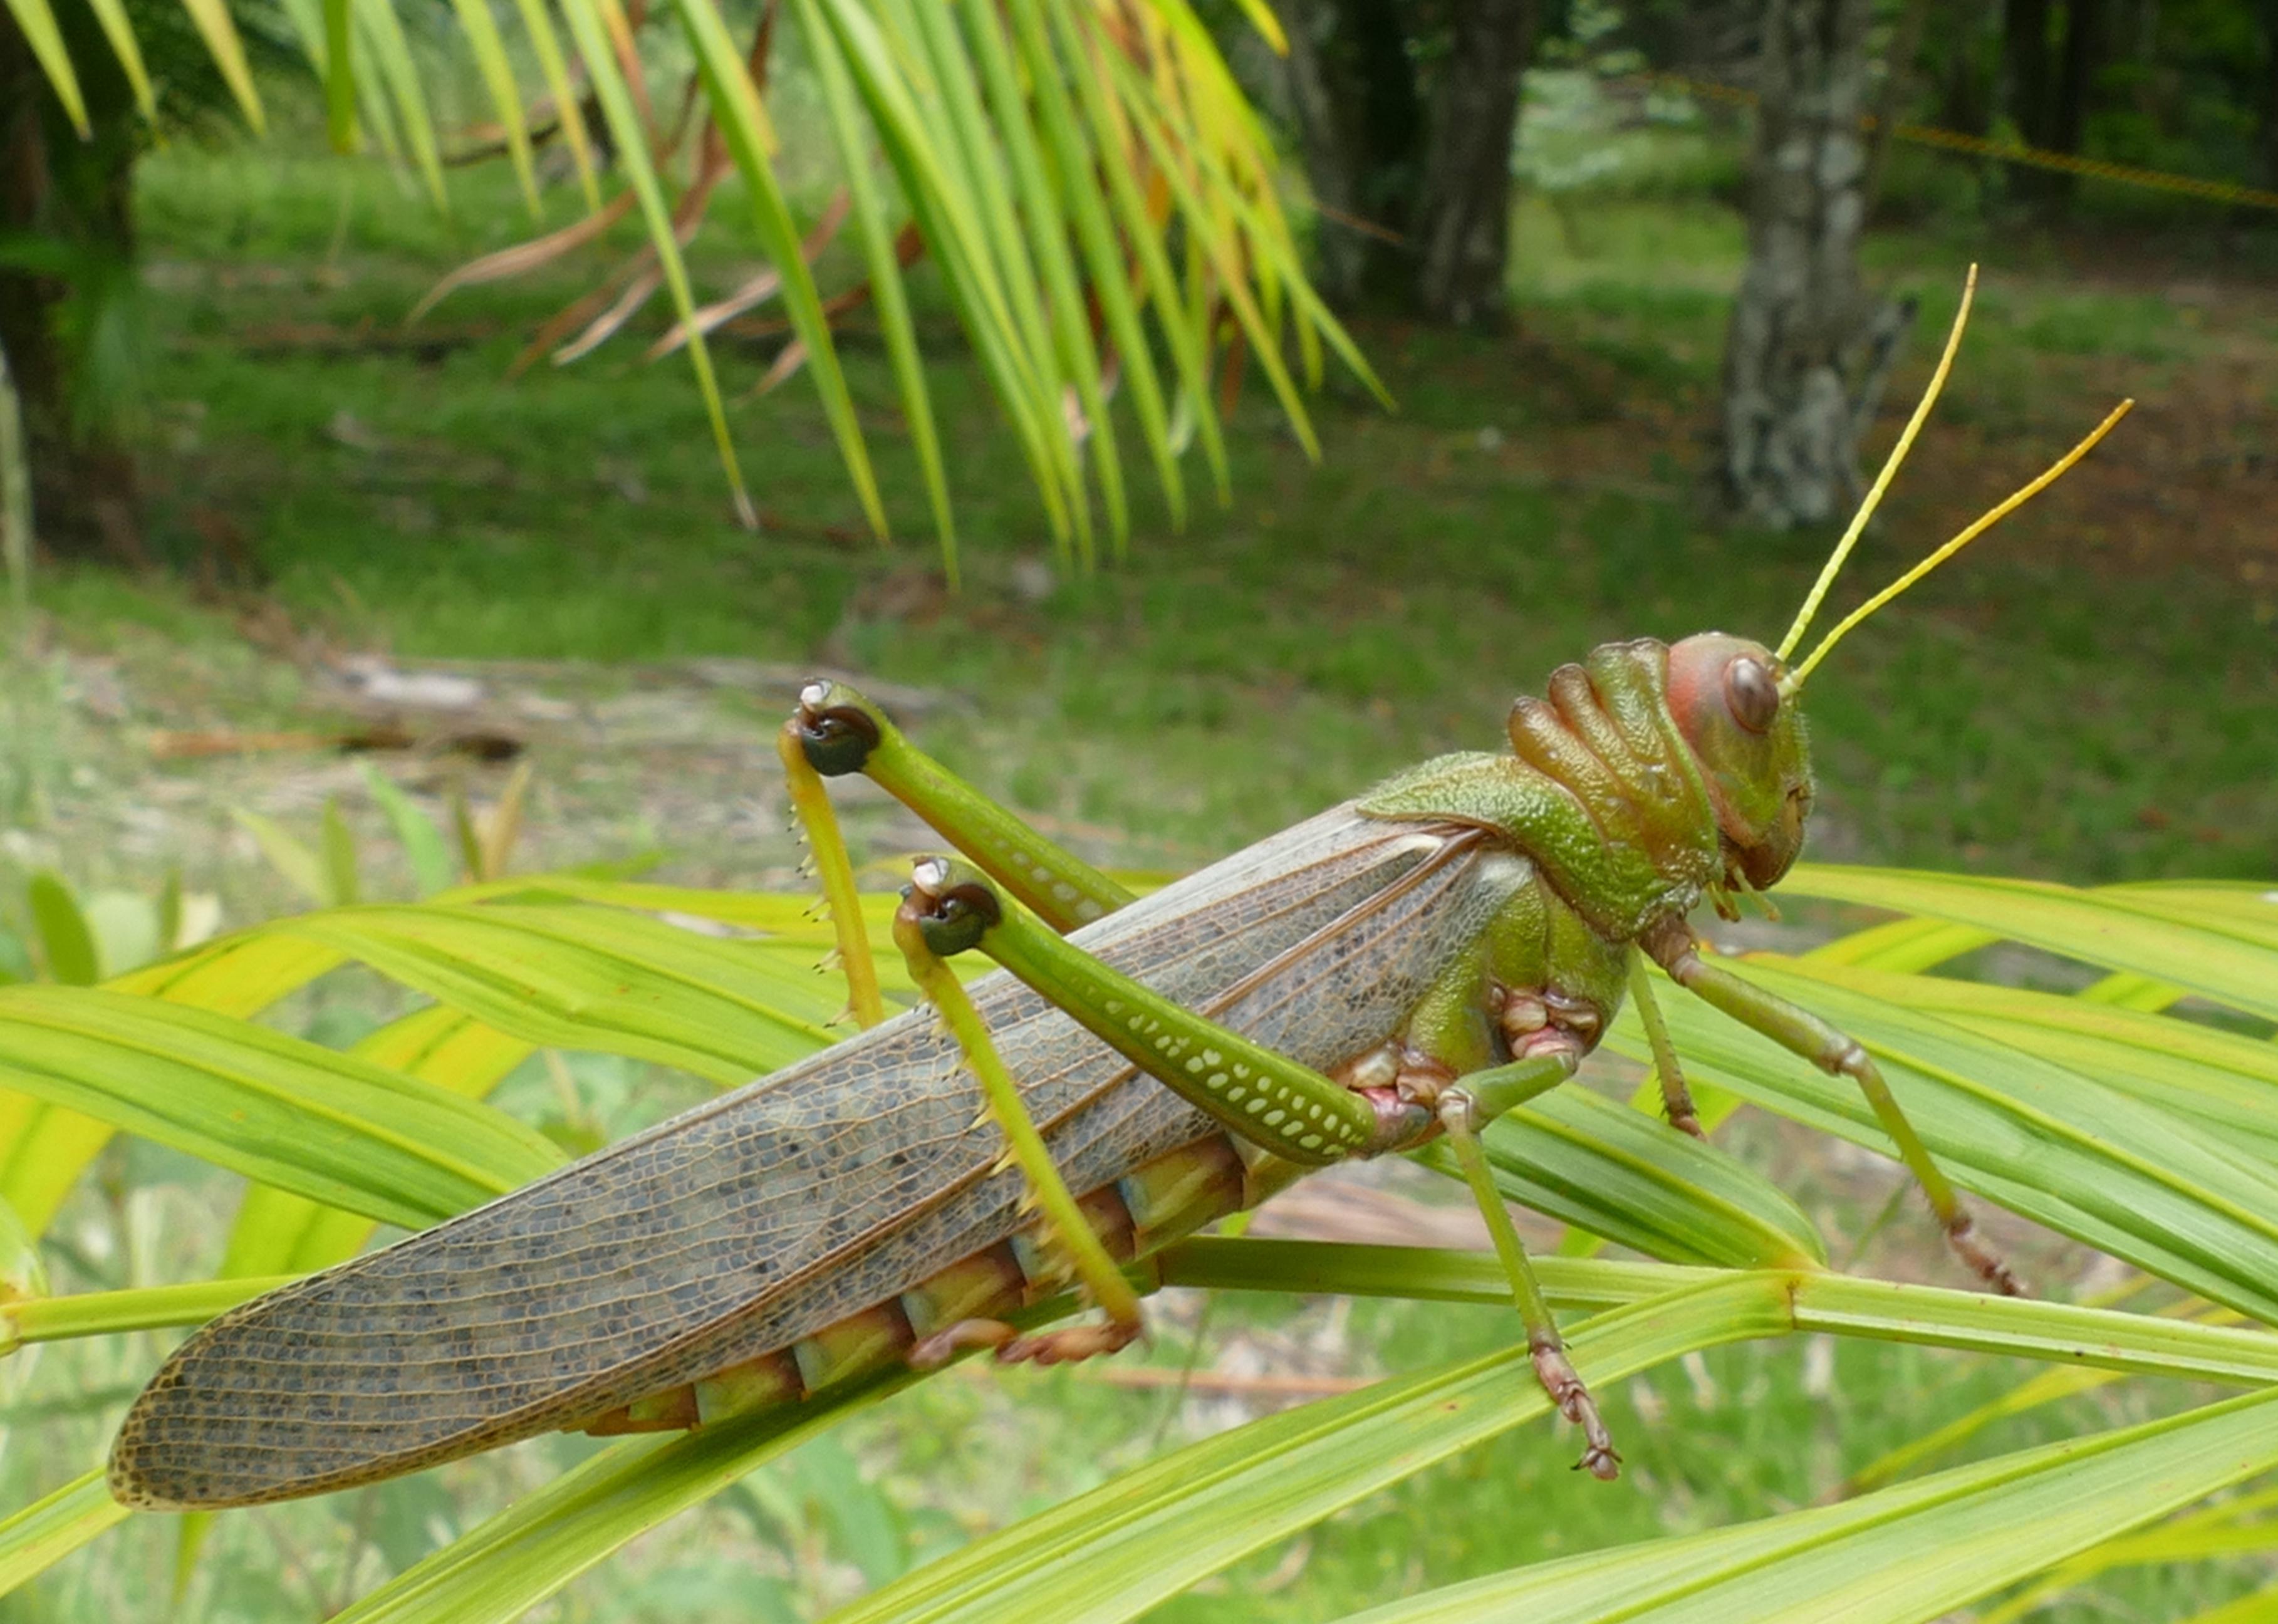 Giant South American grasshopper on green leaves.